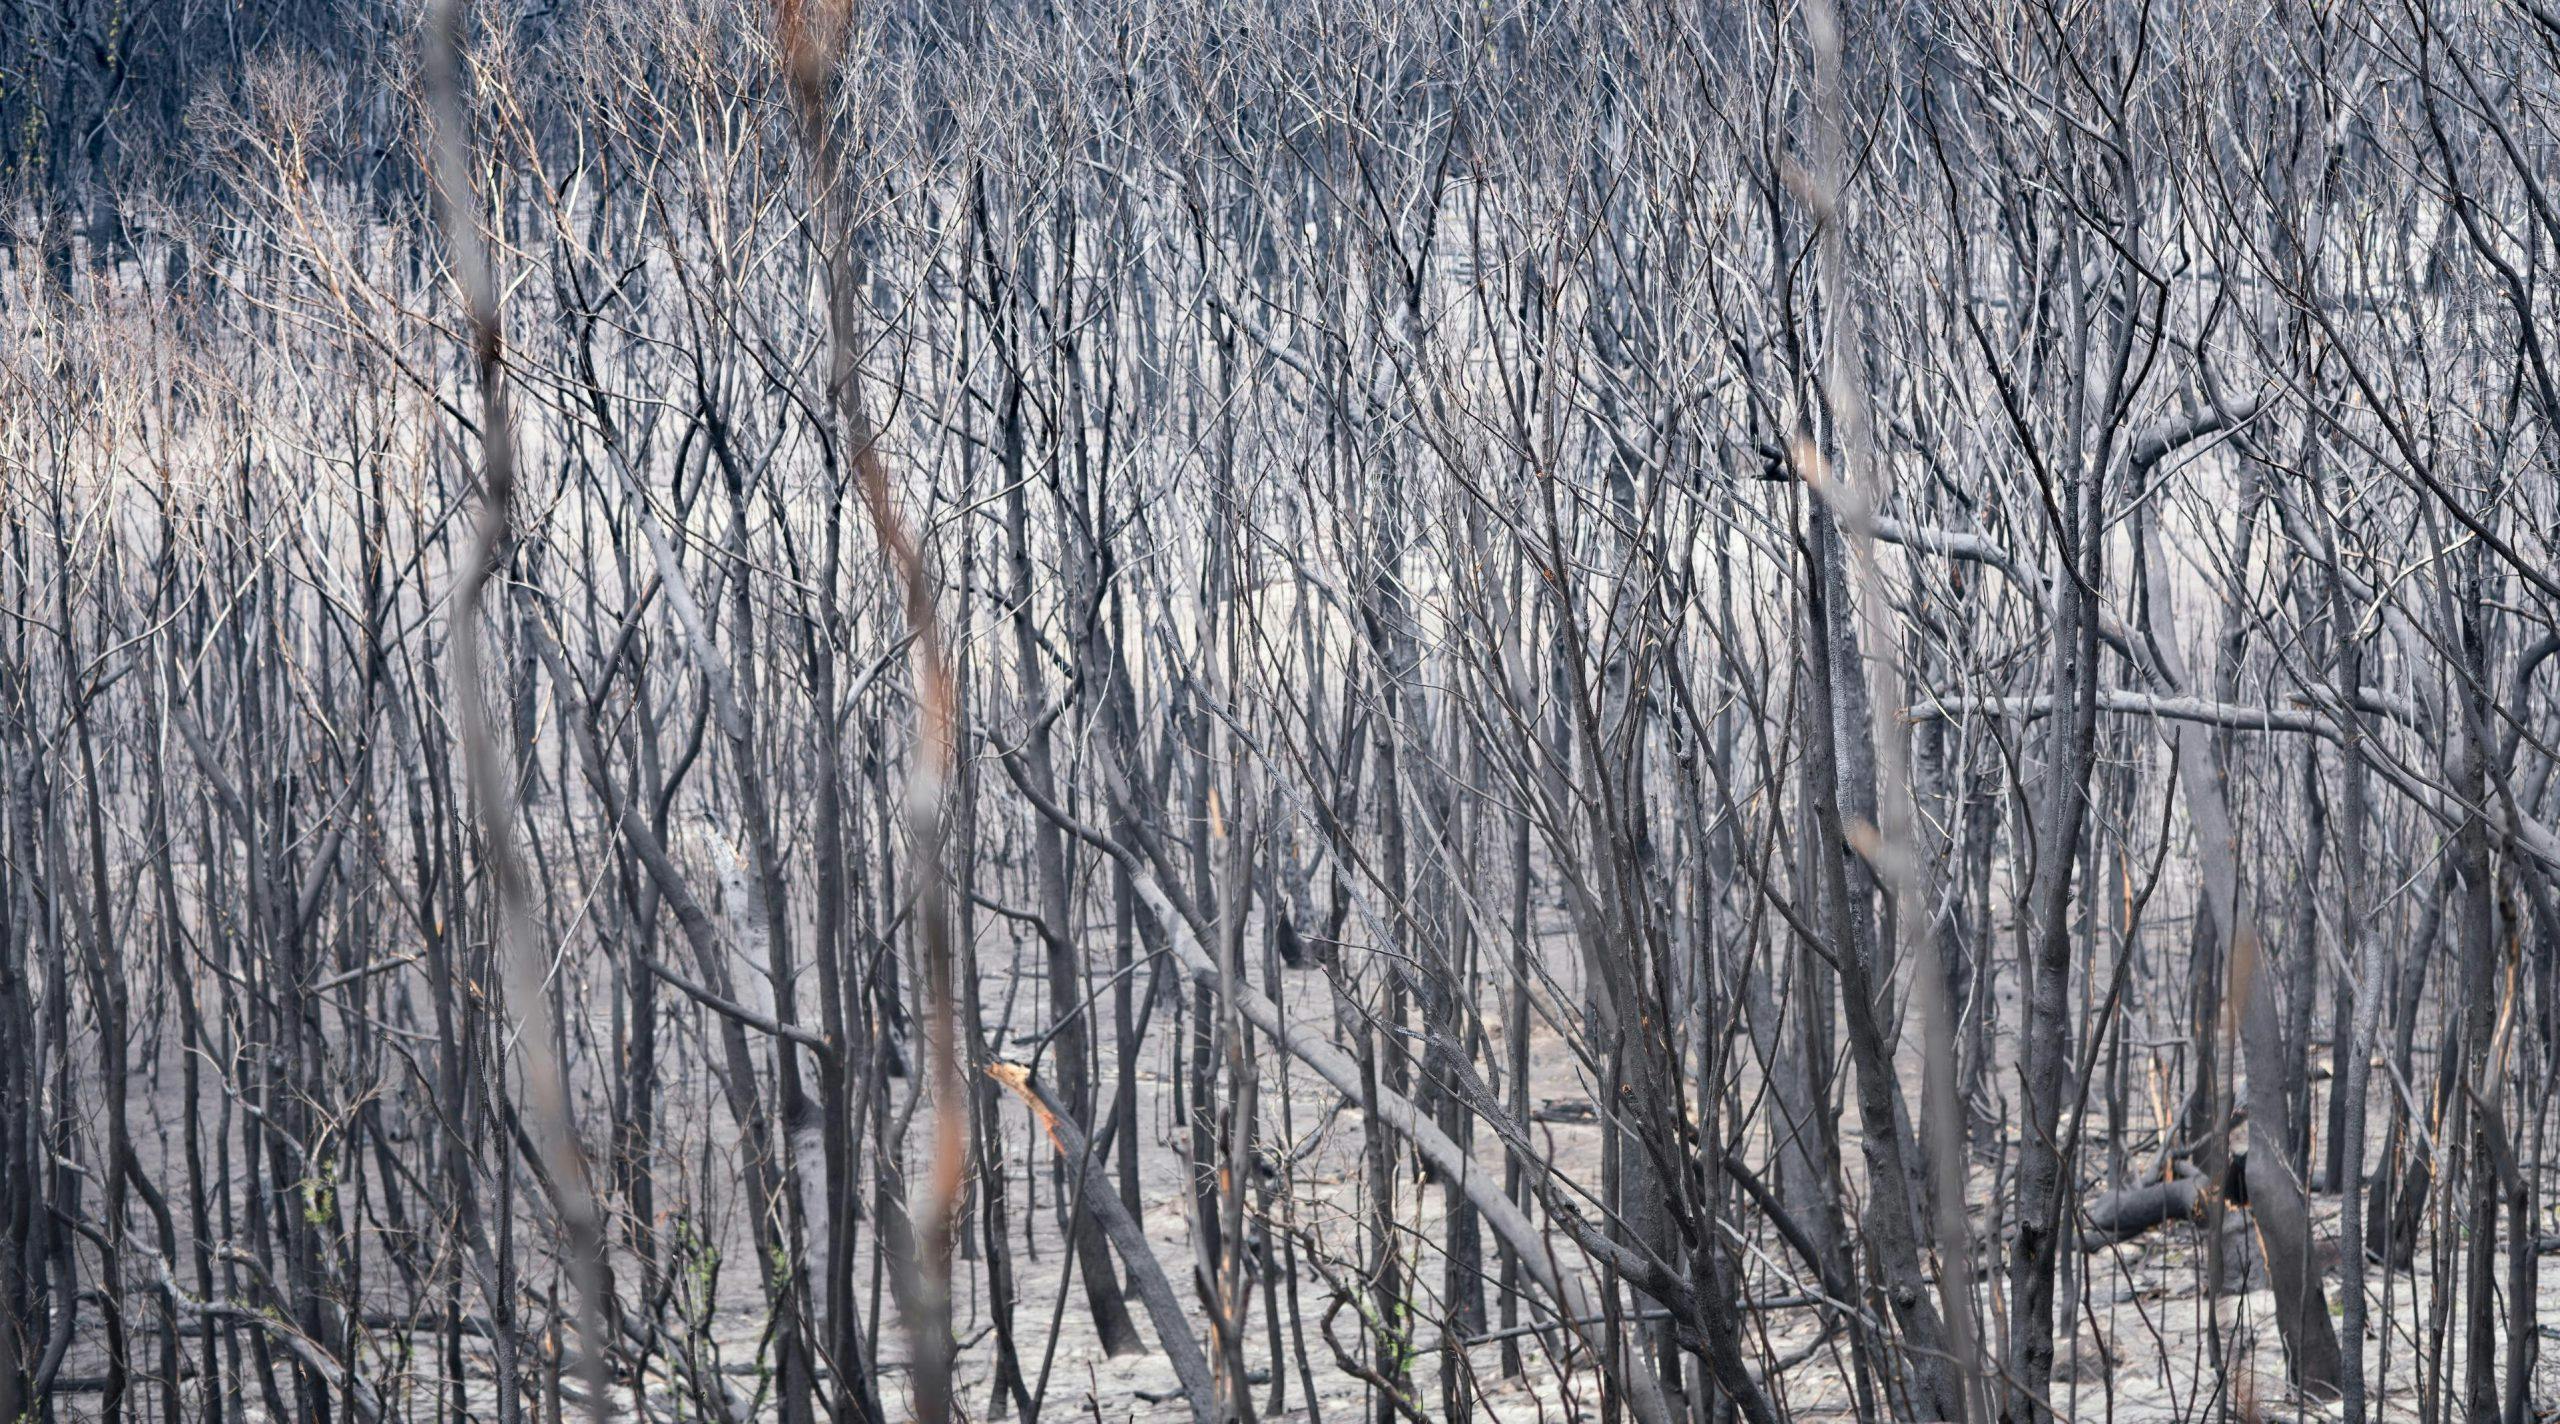 A mass of thin black charred tree trunks against a dusty grey landscape after a bushfire.